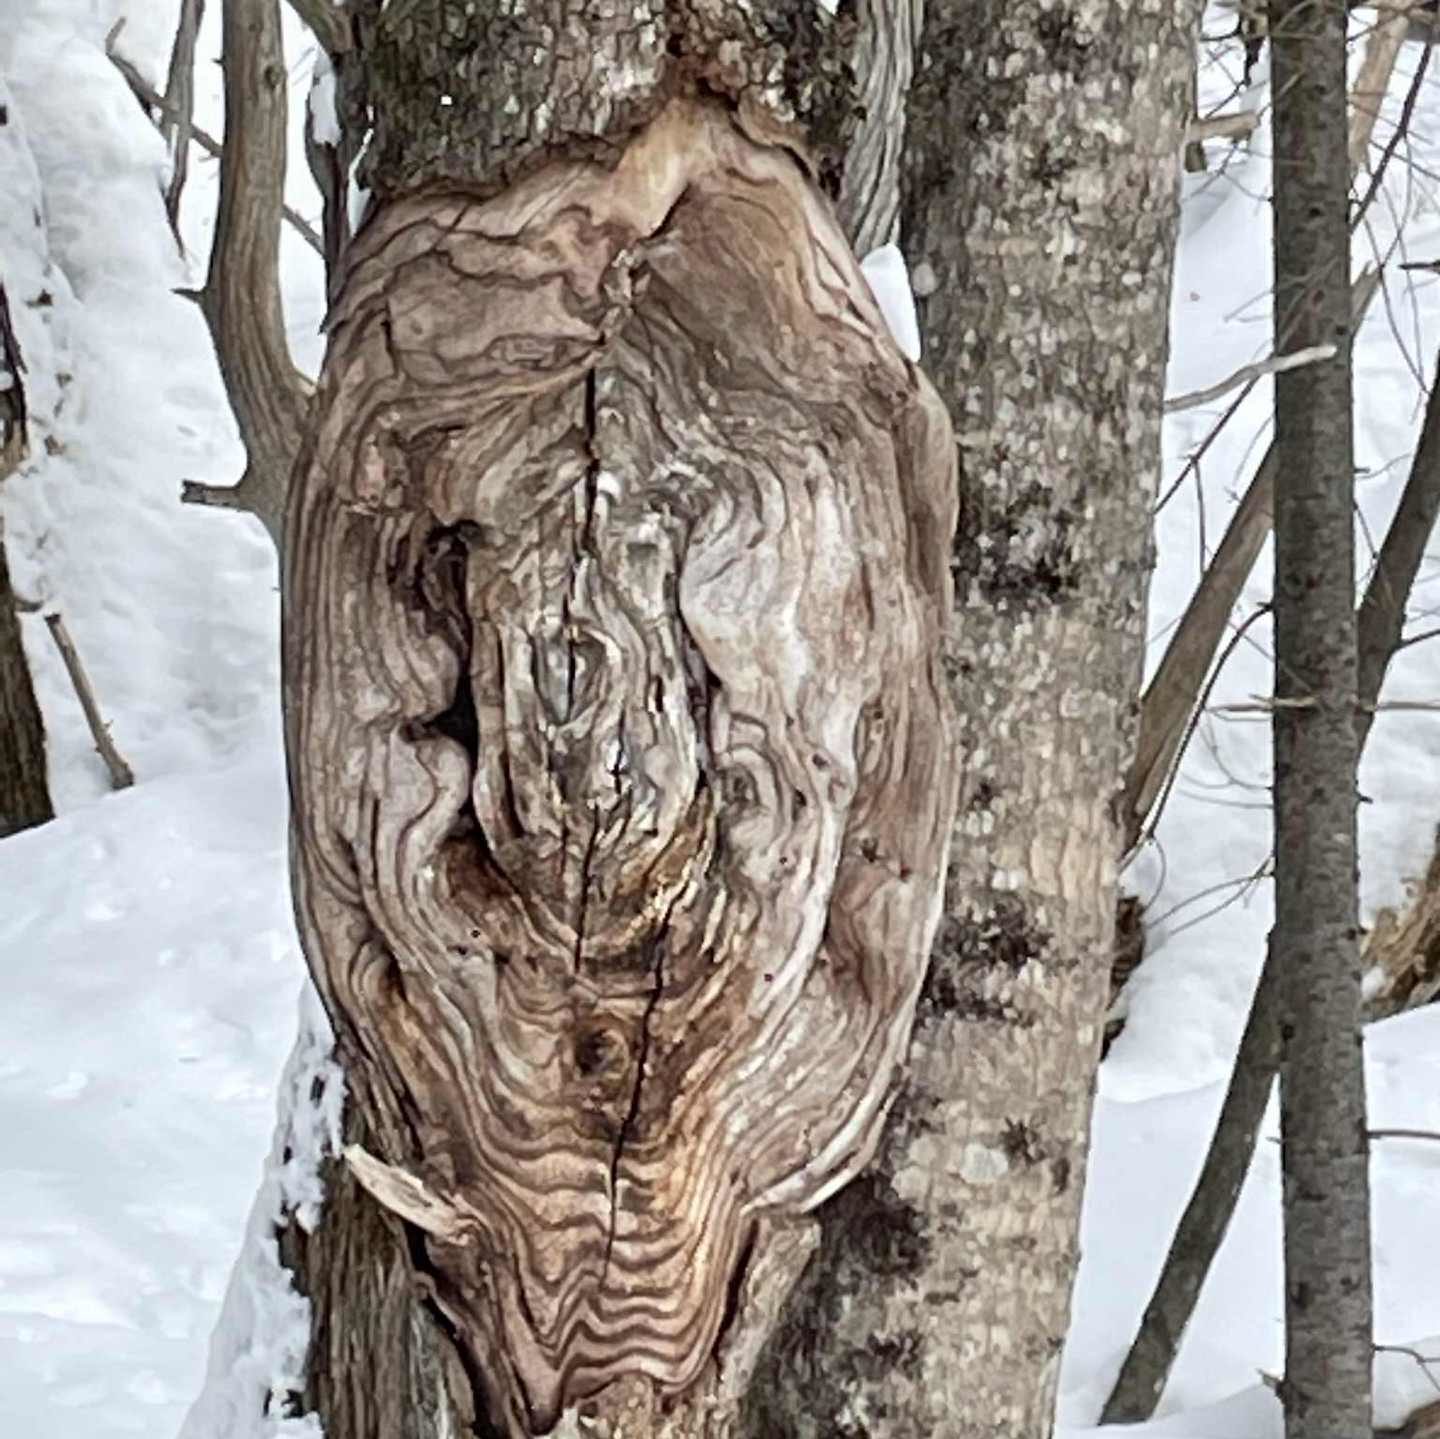 A tree trunk with an interesting burl found in Gatineau, Quebec on the Jack Pine Trail